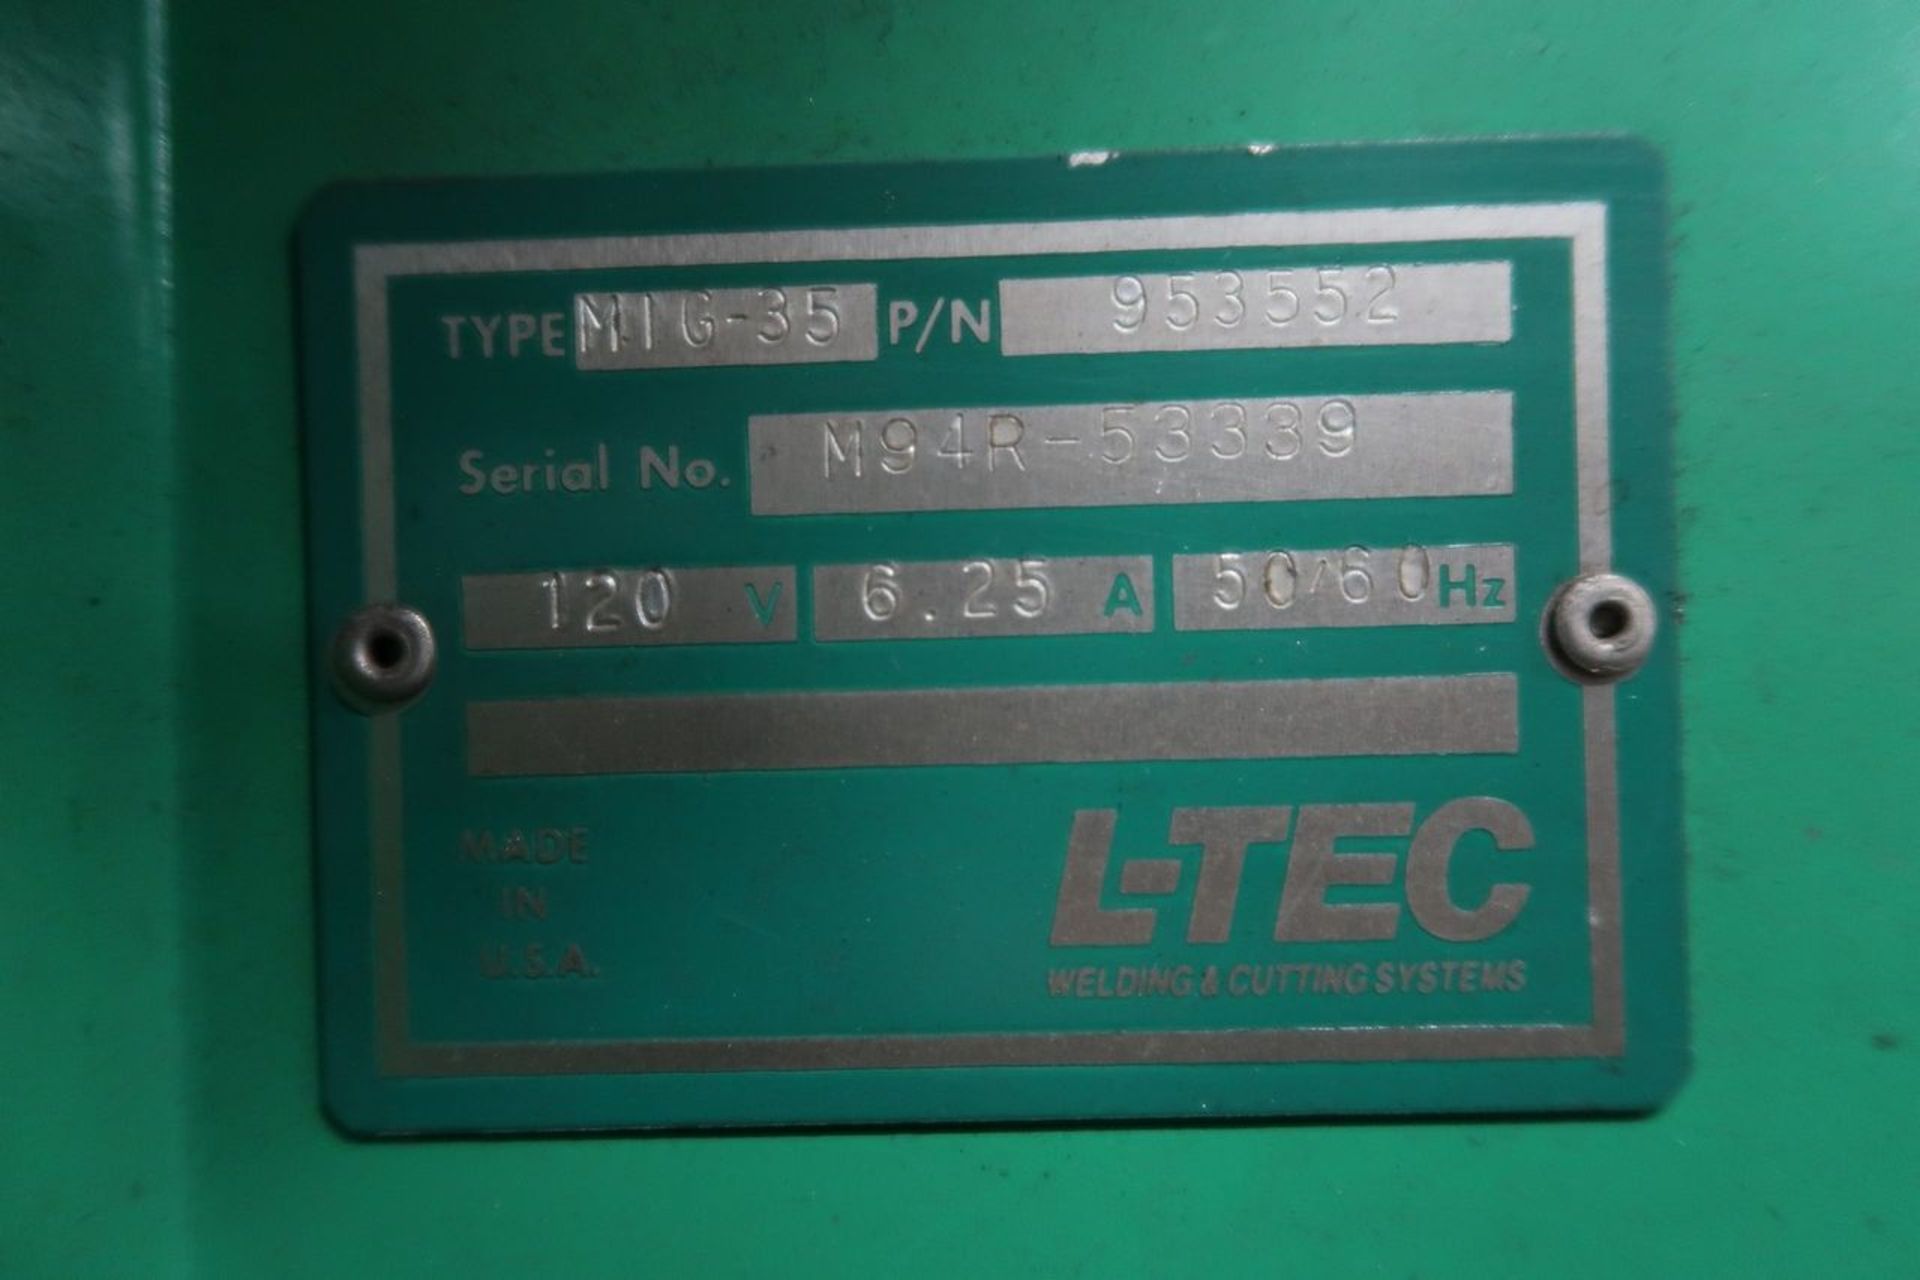 Linde Type SVI-203 Welding Power Supply; with L-Tec Type Mig-35 Wire Feeder S/N: M94R-53339 - Image 6 of 6